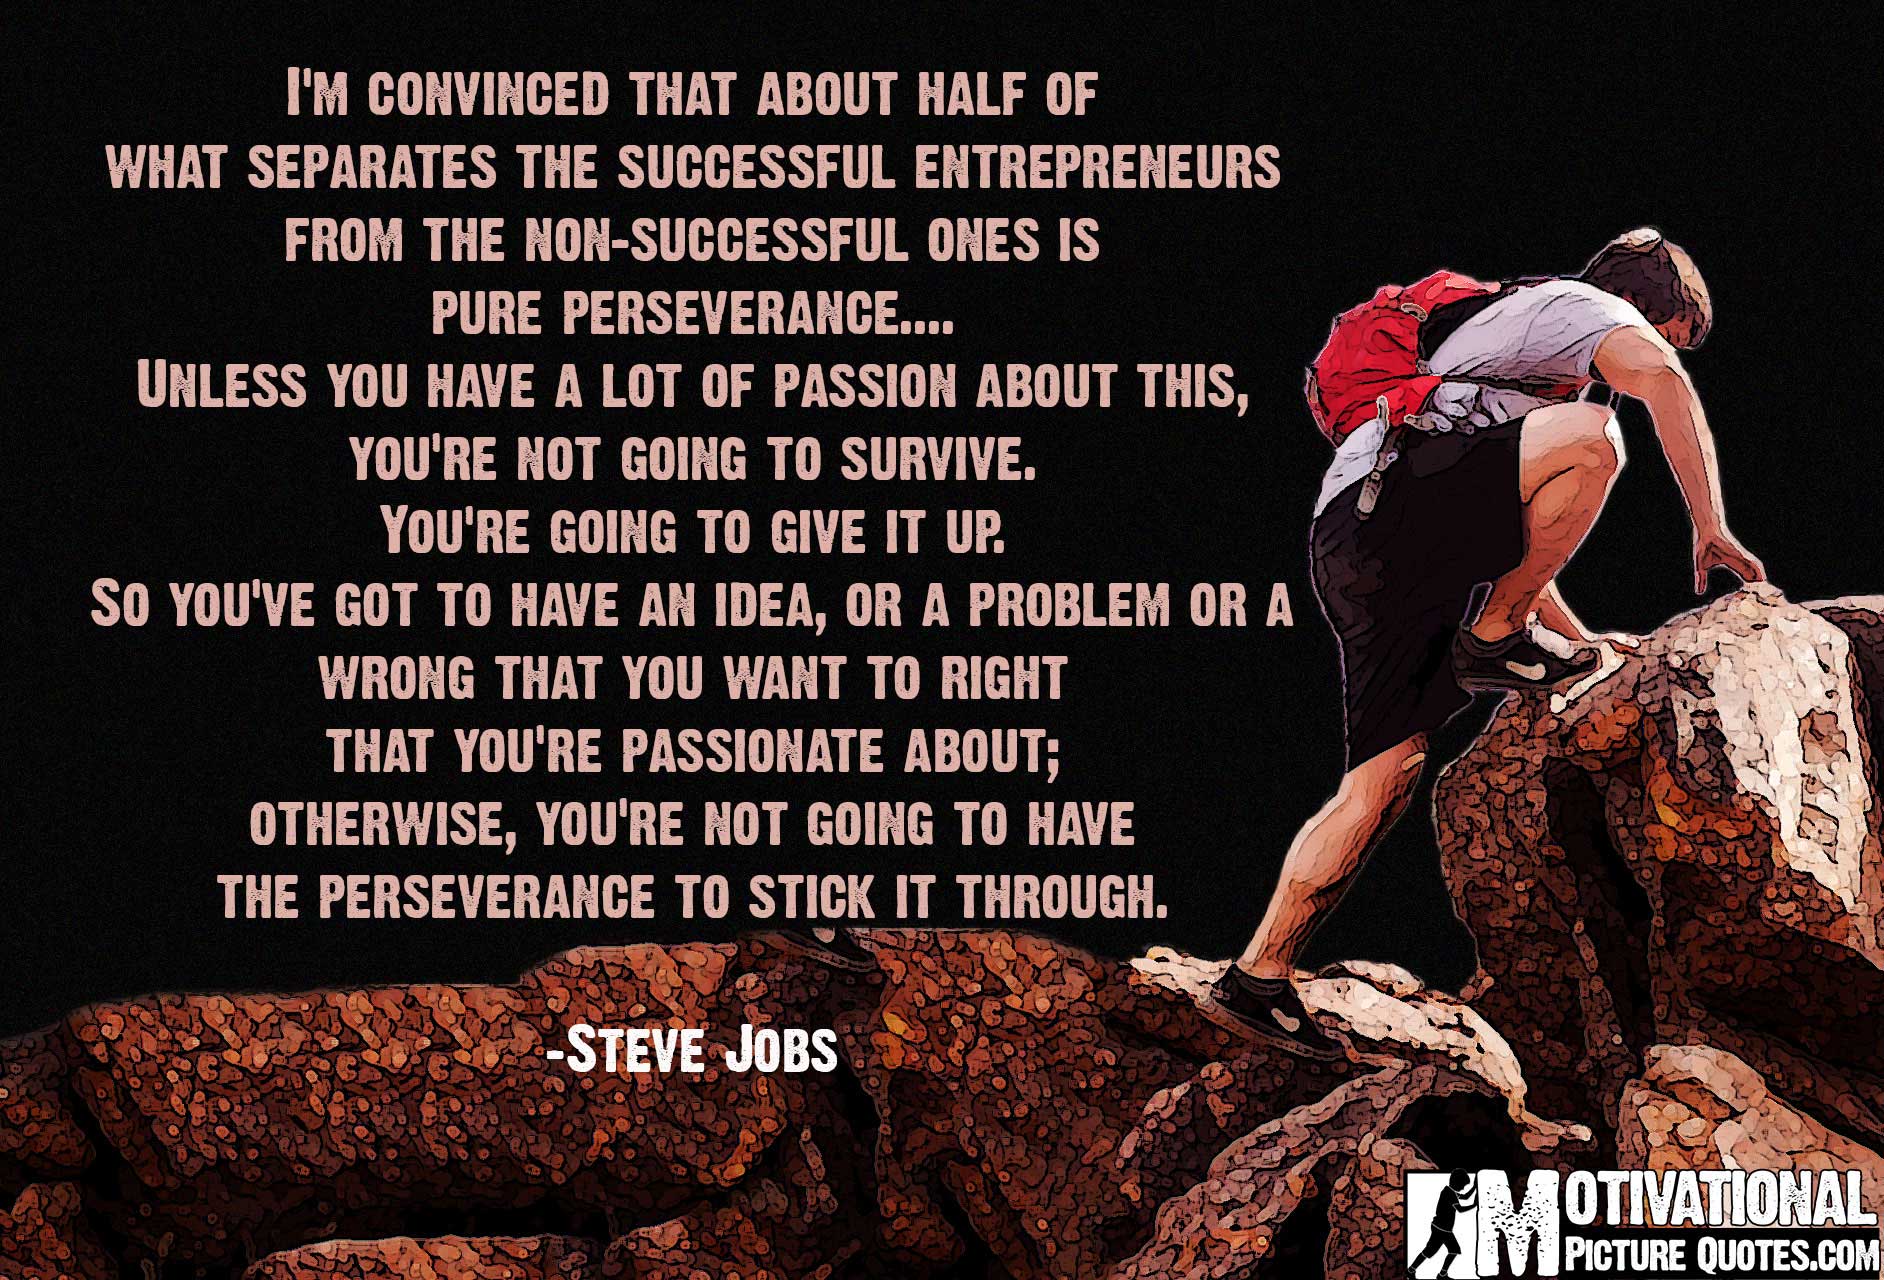 Inspirational Quote About Perseverance by Steve Jobs “